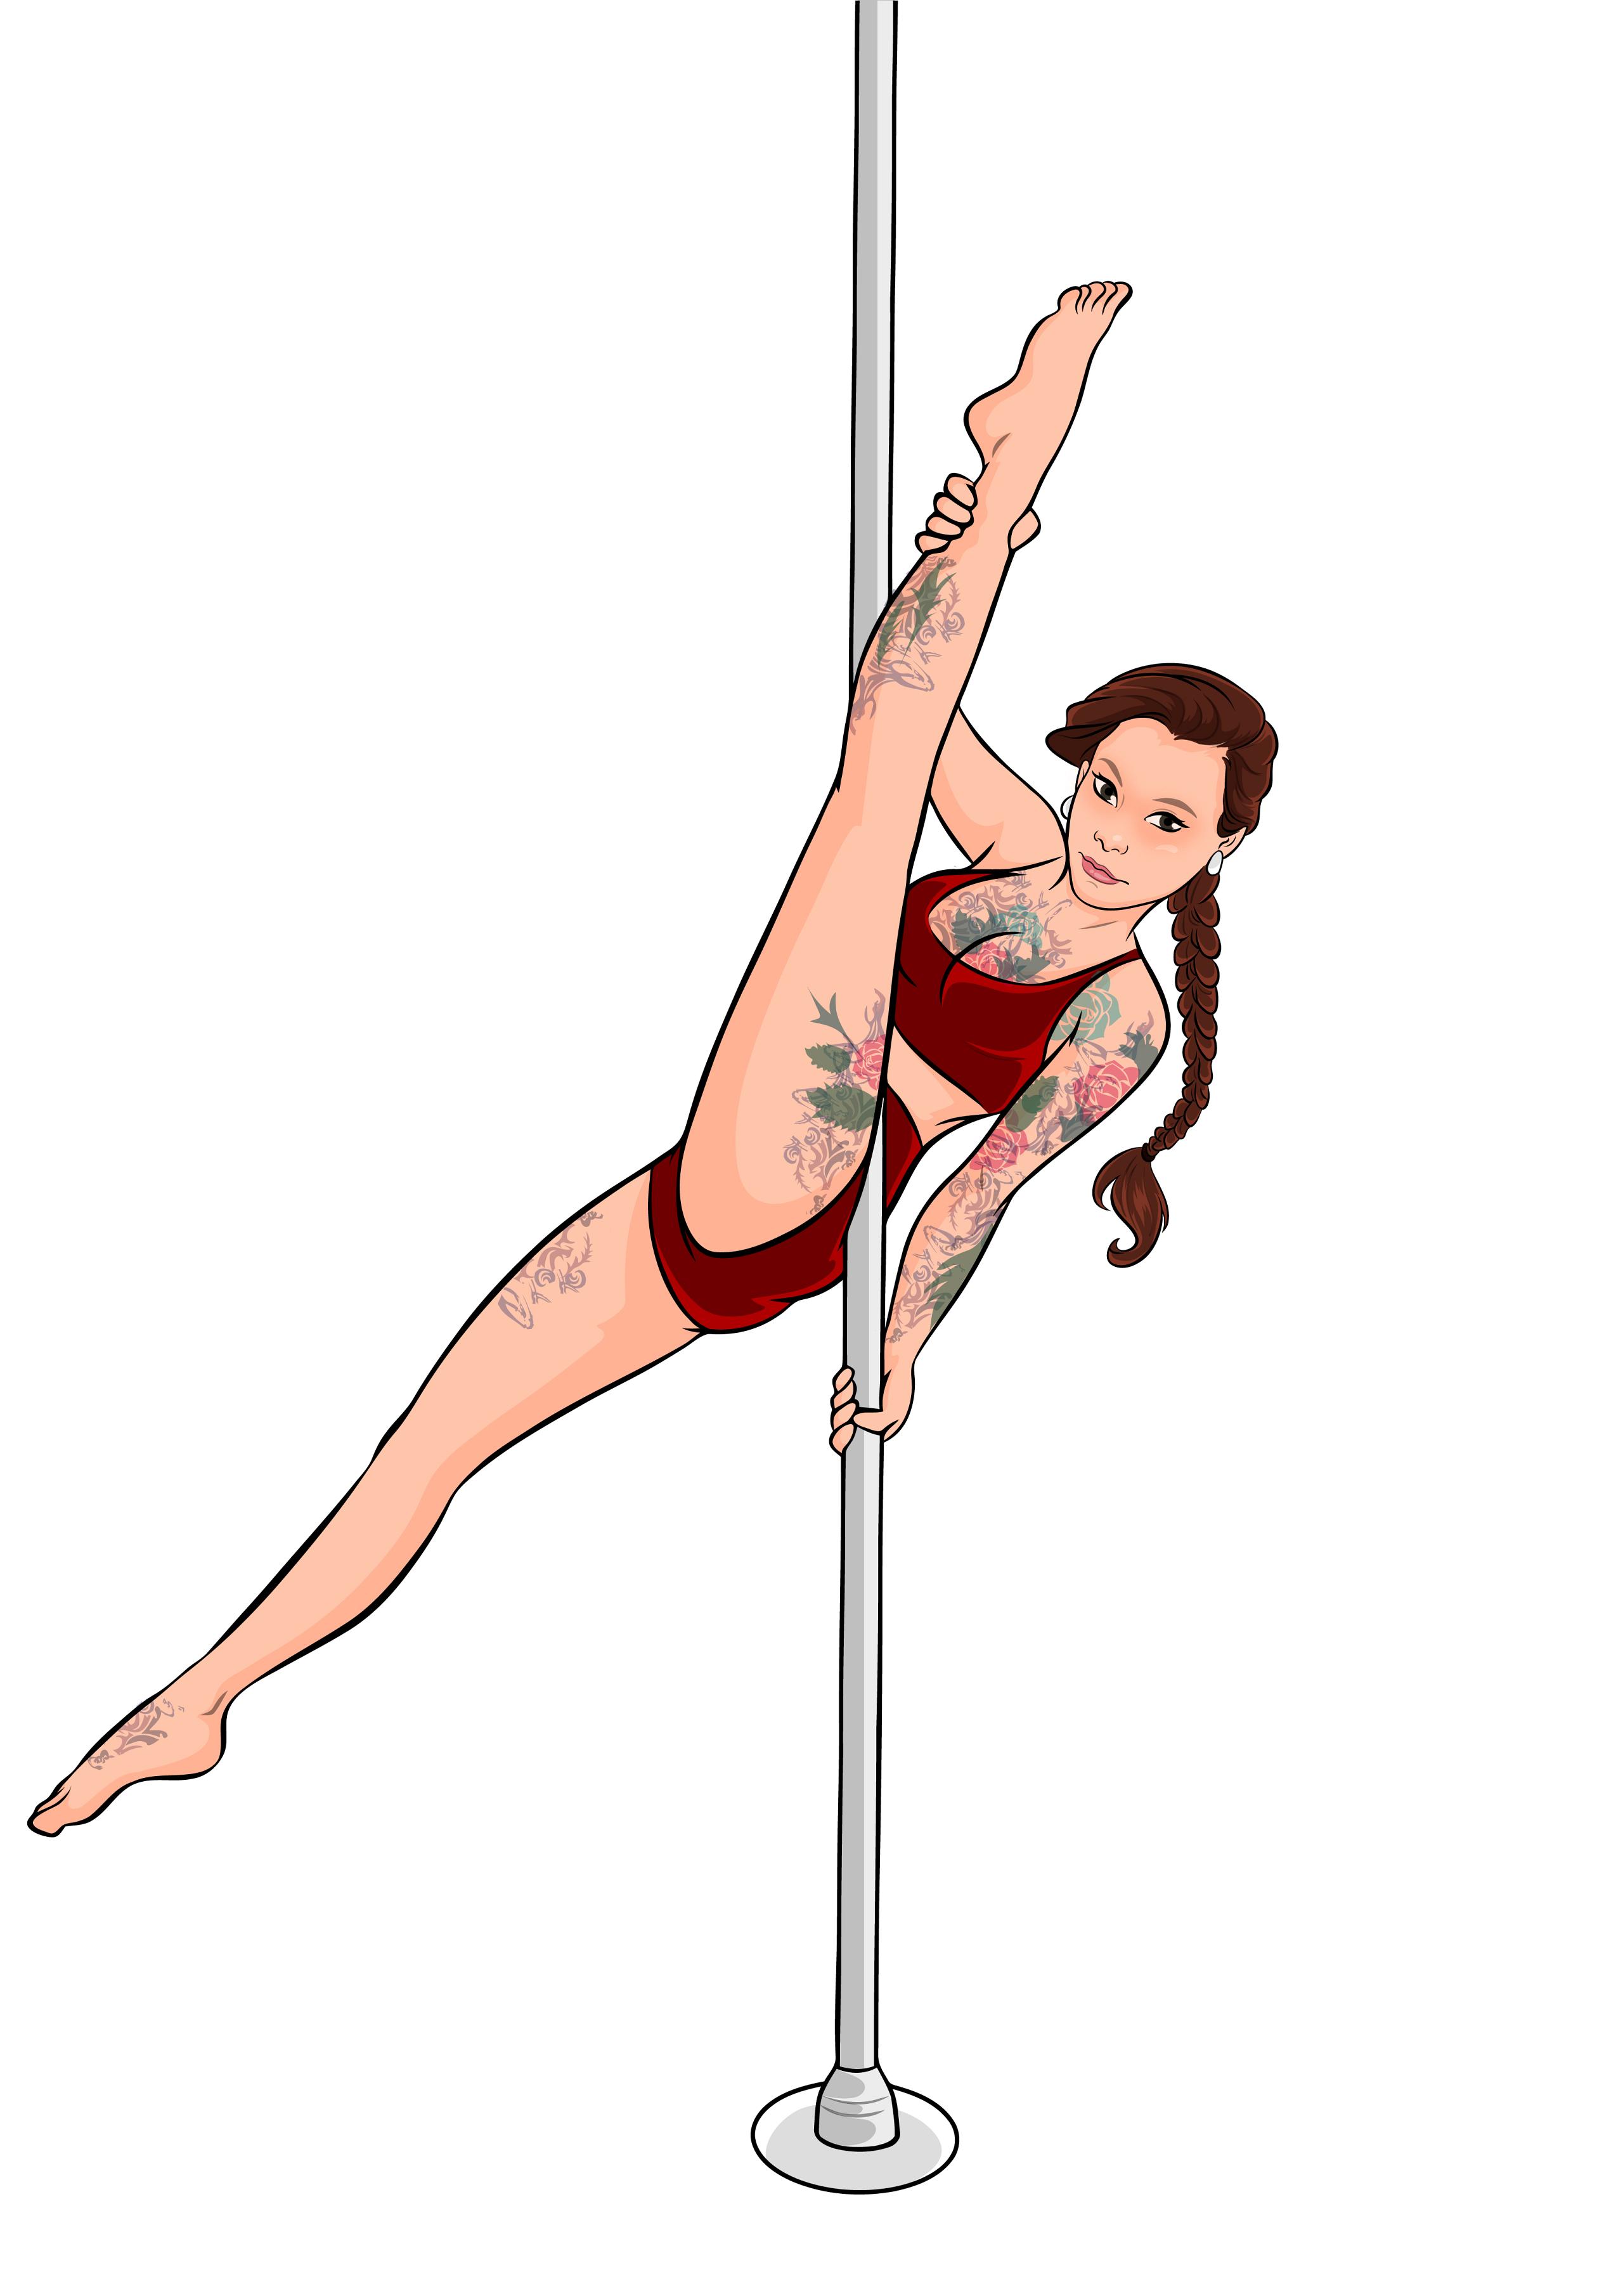 Cartoon drawing of The Pole Hub instructor Fran S holding a pose on a pole